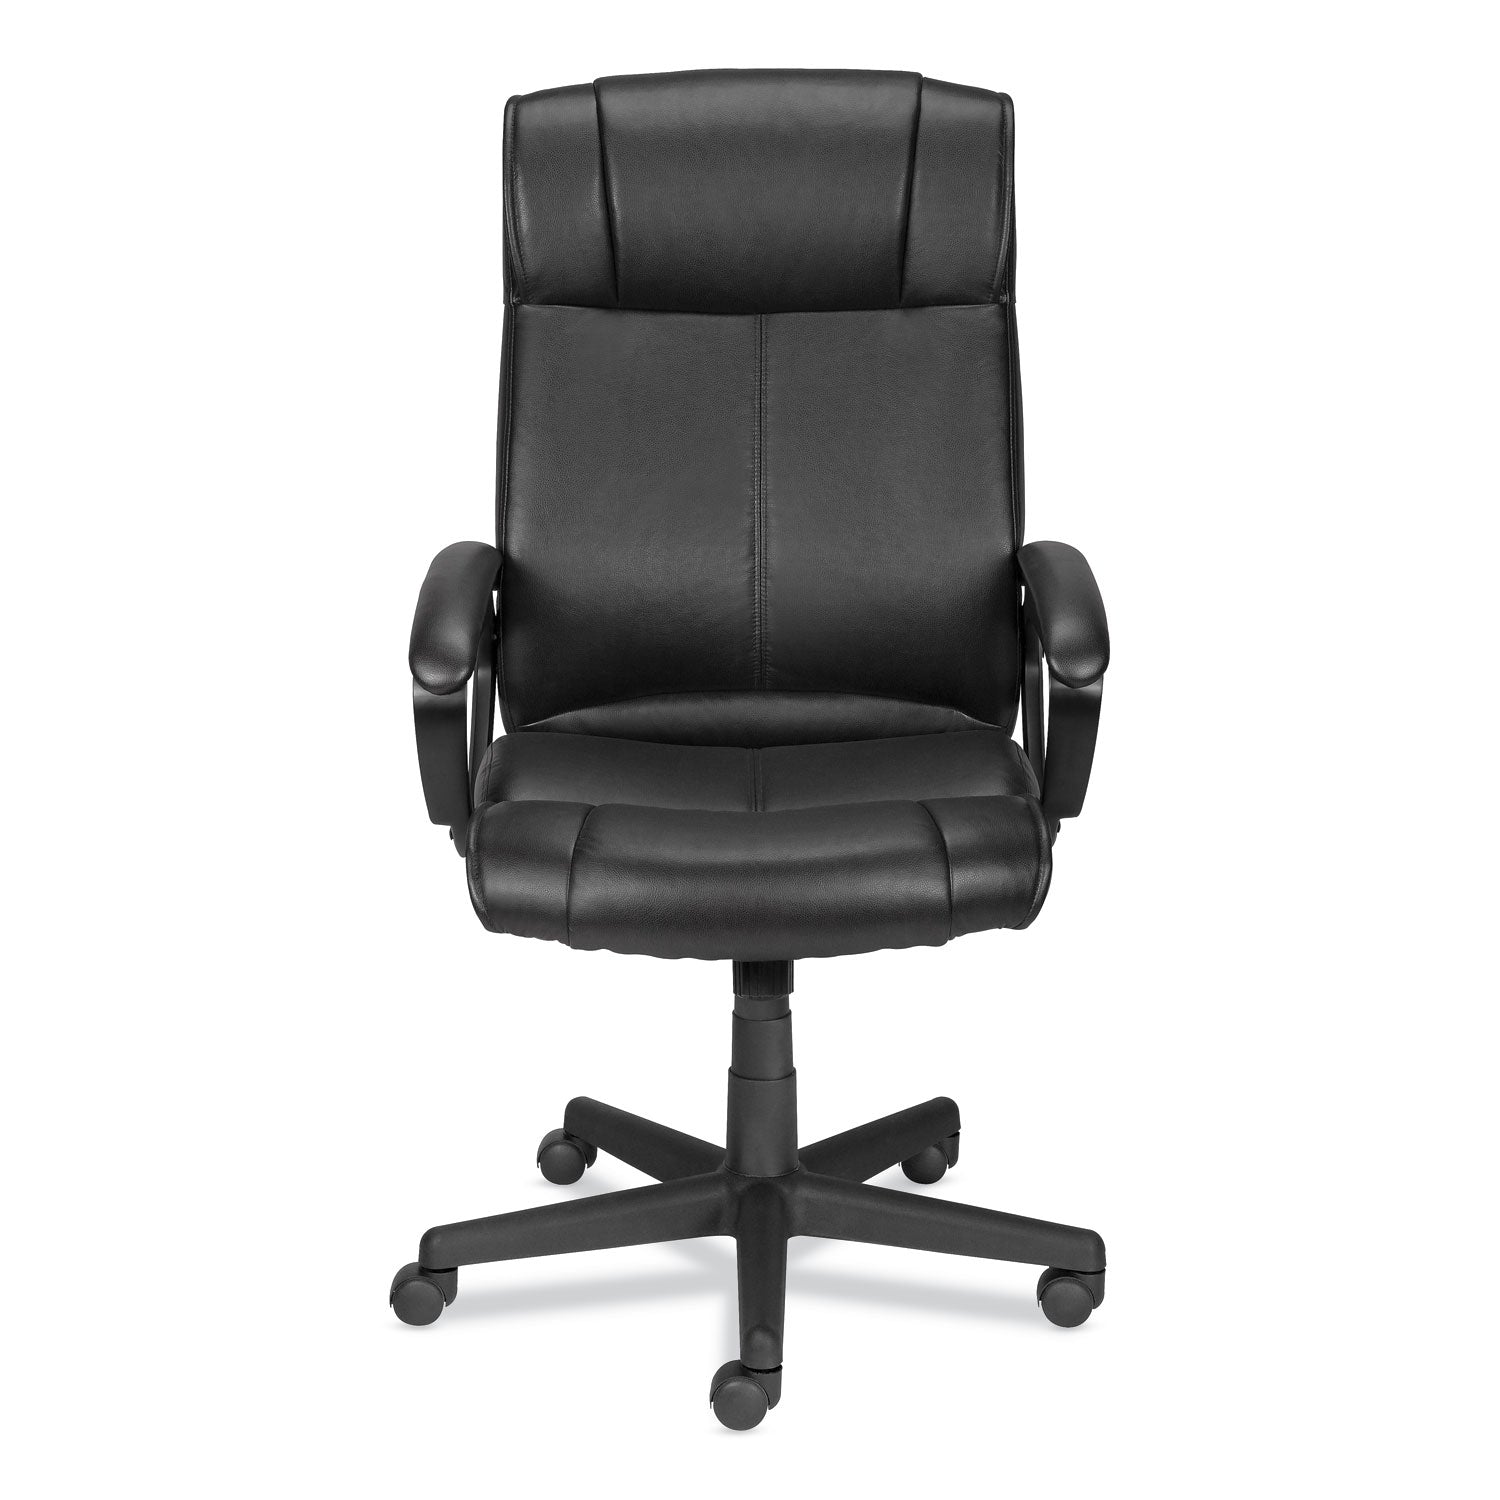 Alera Dalibor Series Manager Chair, Supports Up to 250 lb, 17.5" to 21.3" Seat Height, Black Seat/Back, Black Base - 2